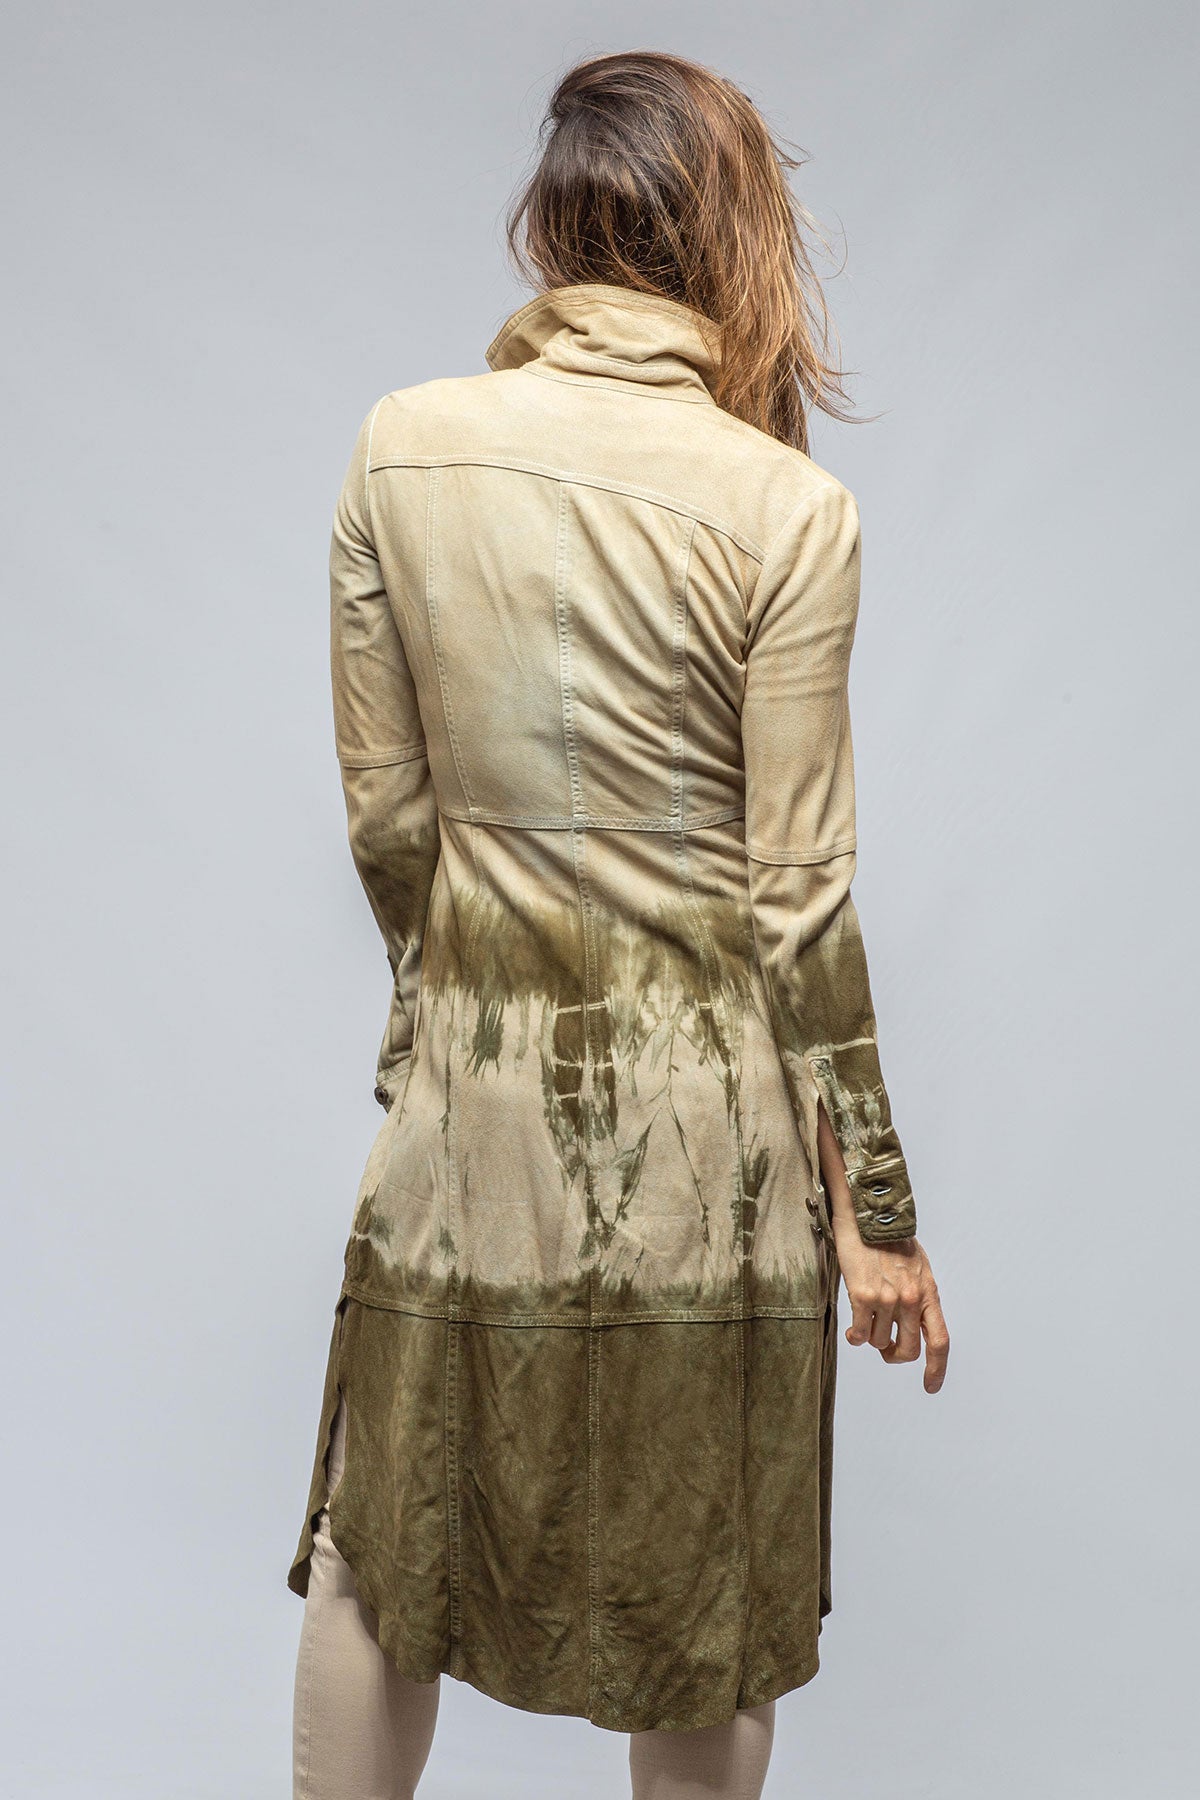 Oasis Tie Dye Long Suede Duster | Ladies - Outerwear - Leather | Roncarati